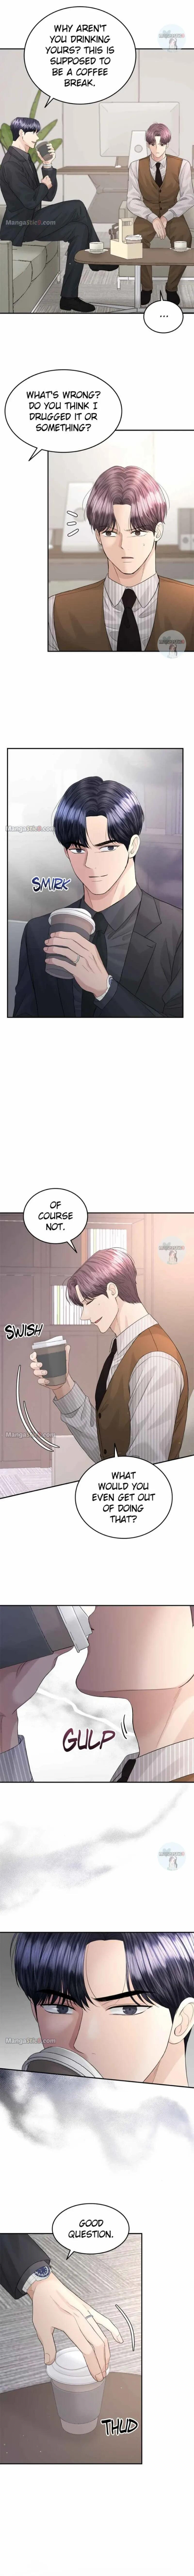 The Essence Of A Perfect Marriage Chapter 97 page 10 - Mangakakalot